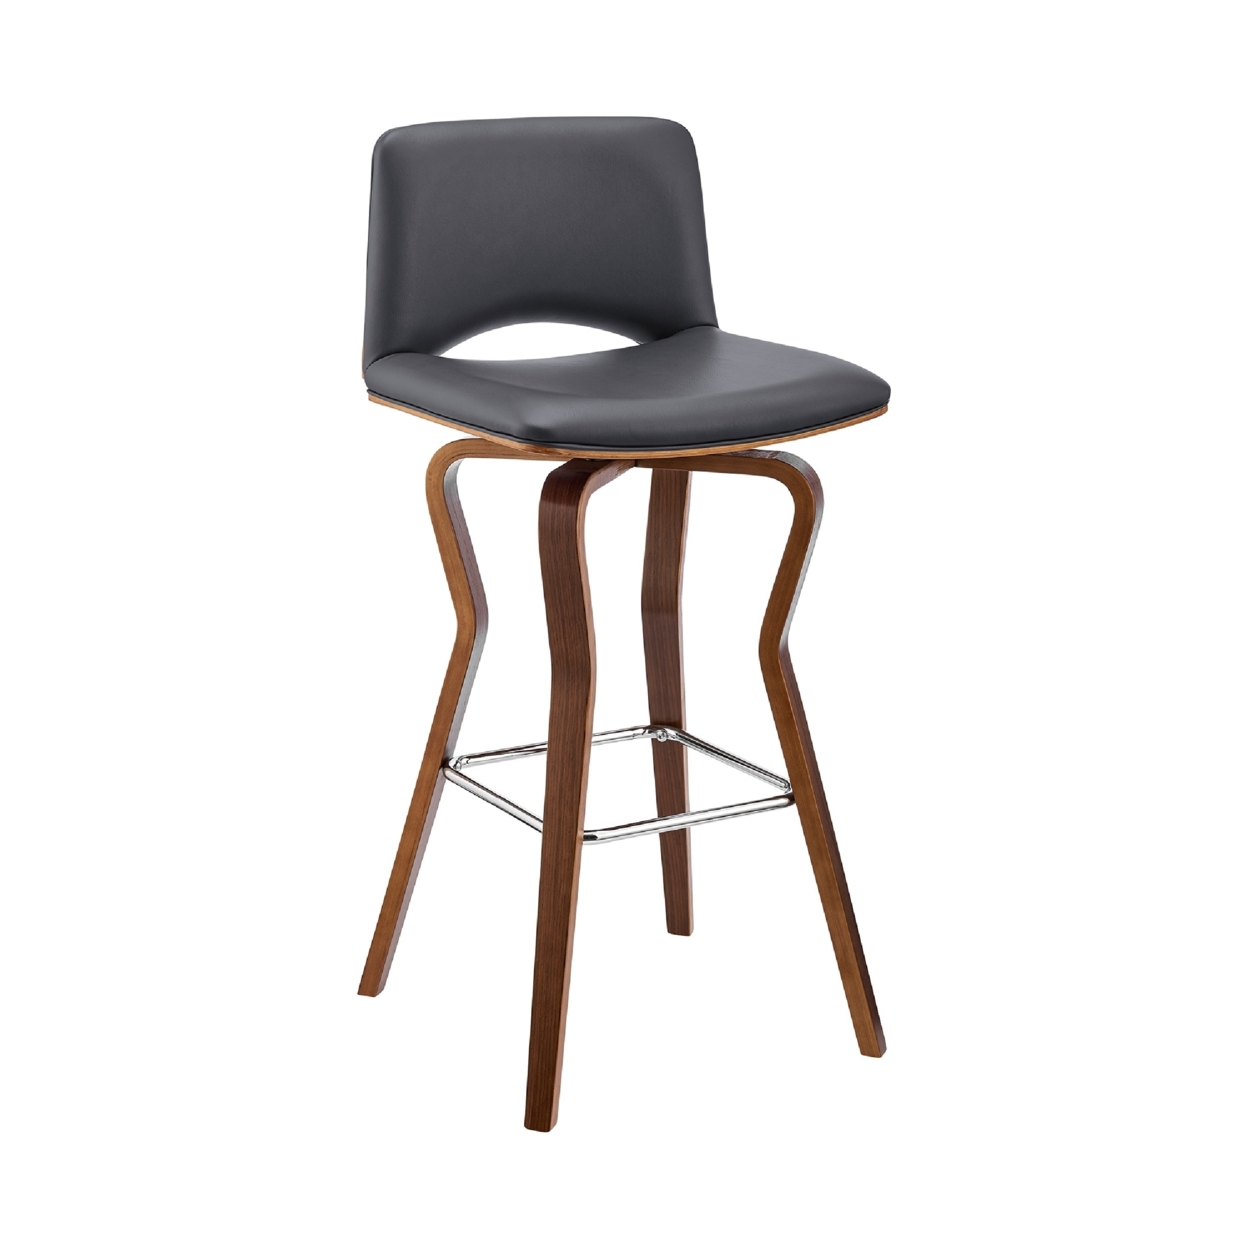 26 Inch Swivel Counter Height Stool With Faux Leather And Wooden Support, Brown And Gray- Saltoro Sherpi